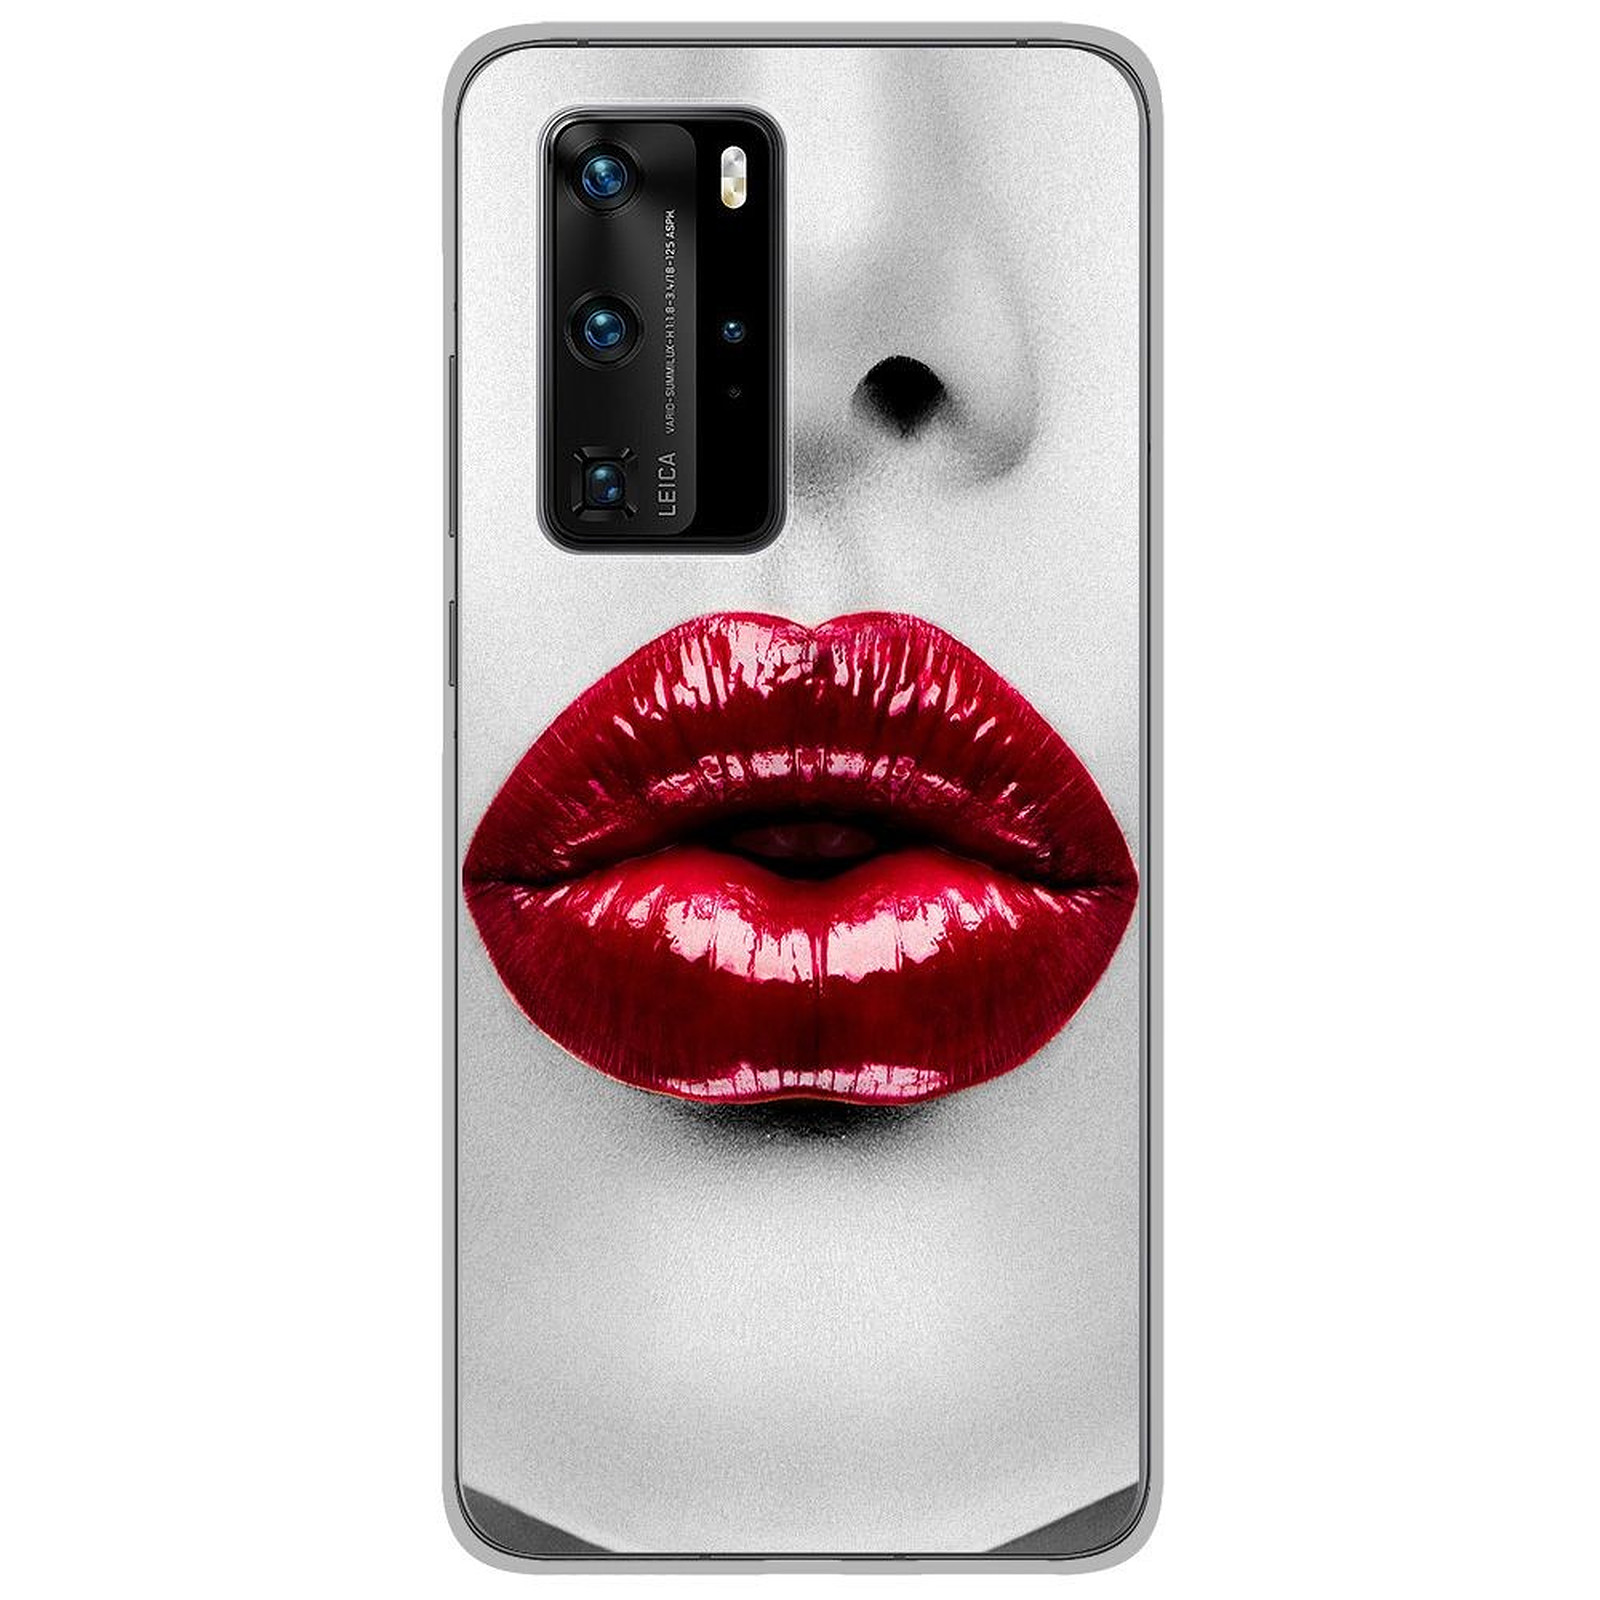 1001 Coques Coque silicone gel Huawei P40 Pro motif Lèvres Rouges - Coque telephone 1001Coques